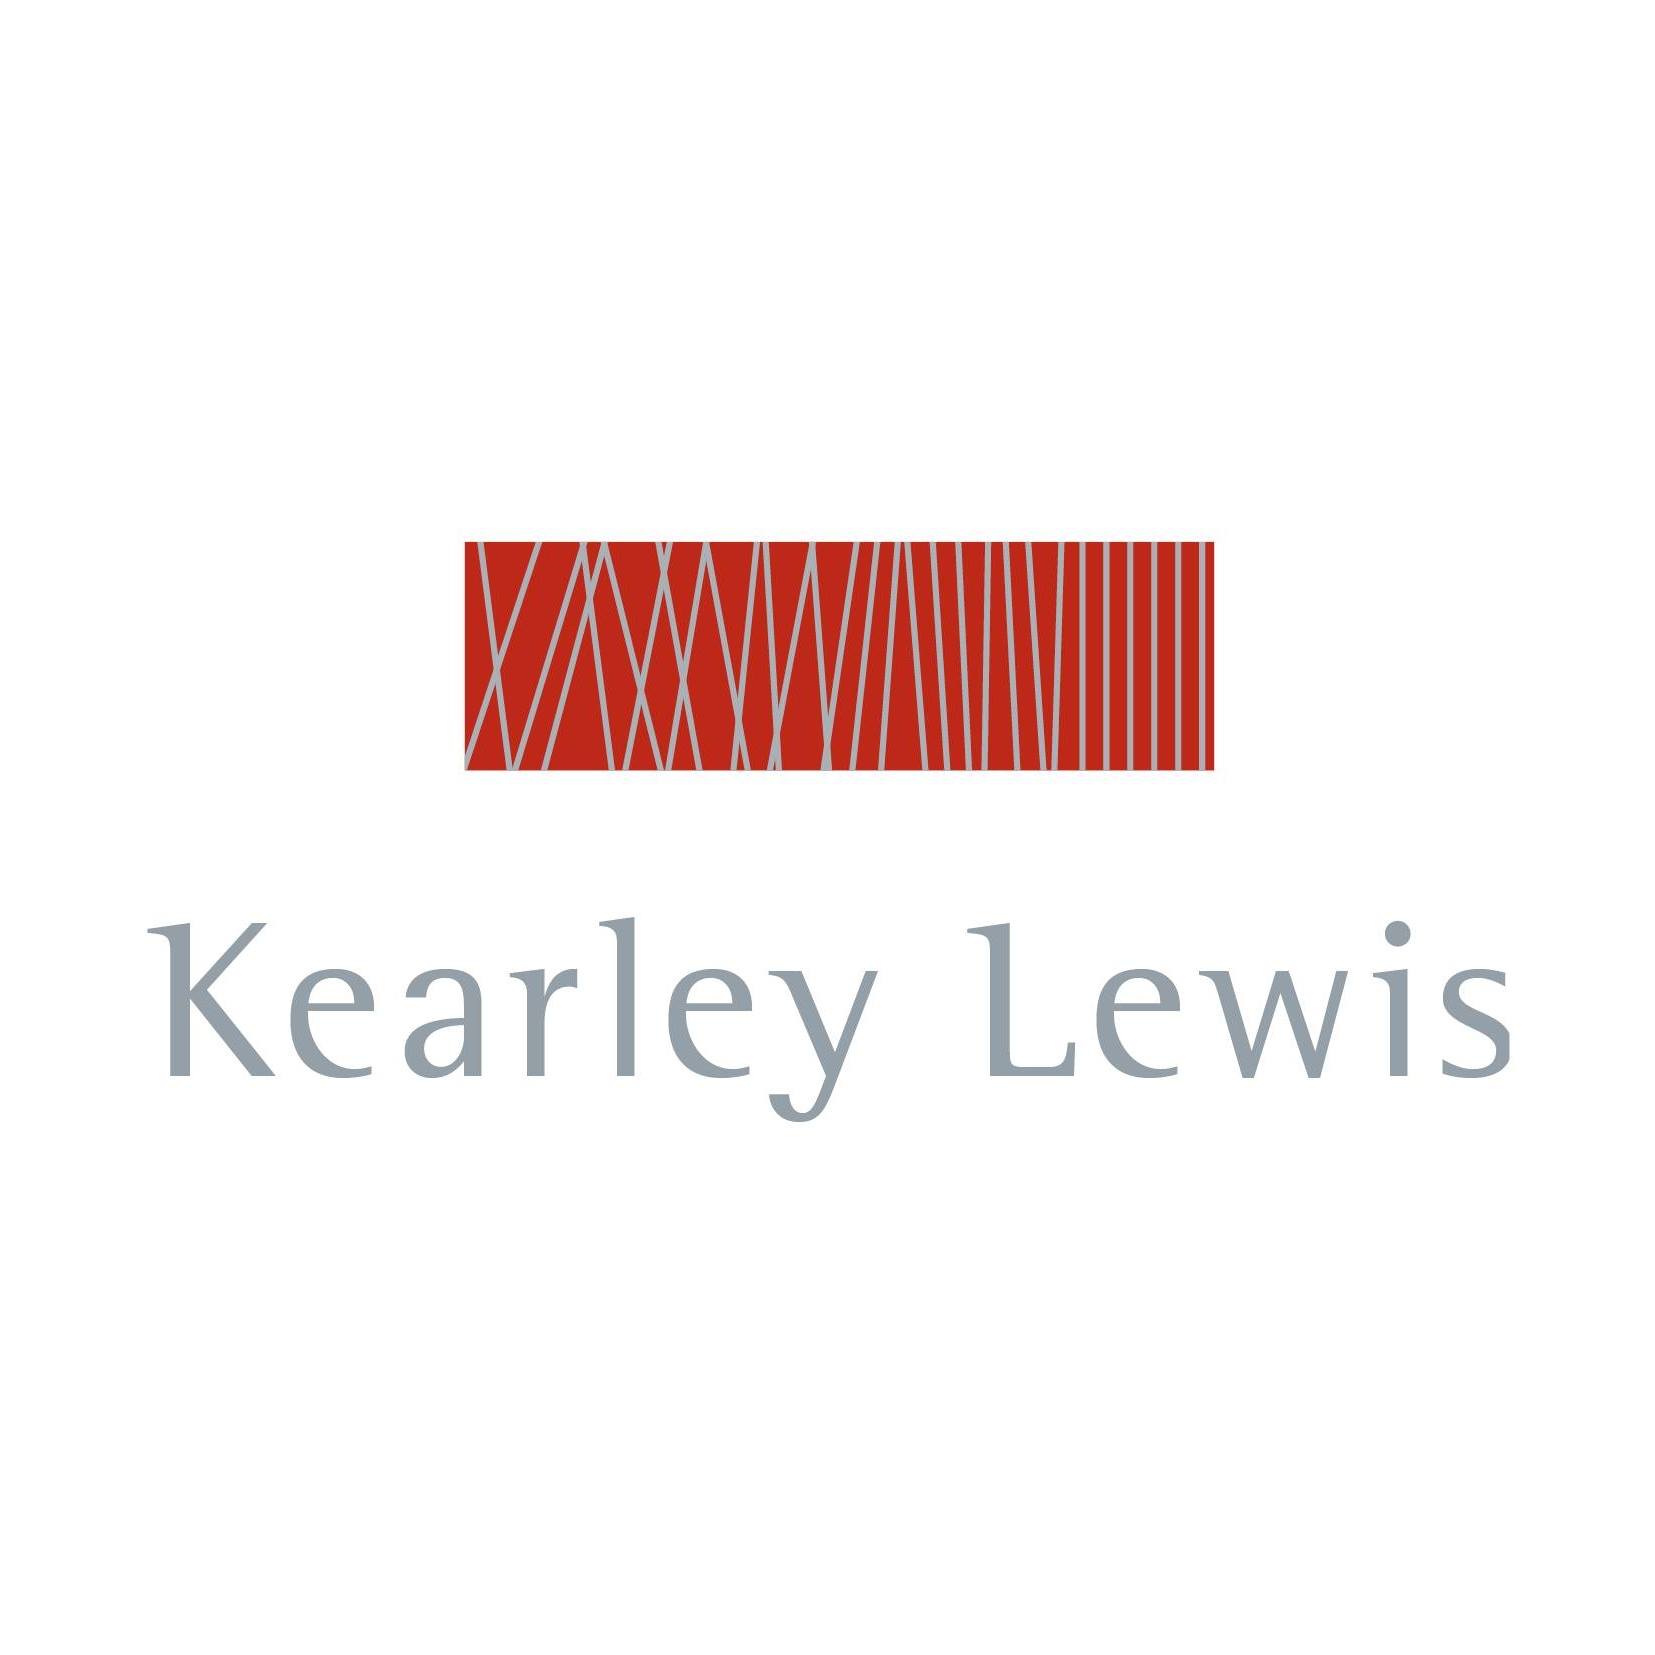 Company logo of Kearley Lewis - Your Debt Recovery Experts working Australia wide